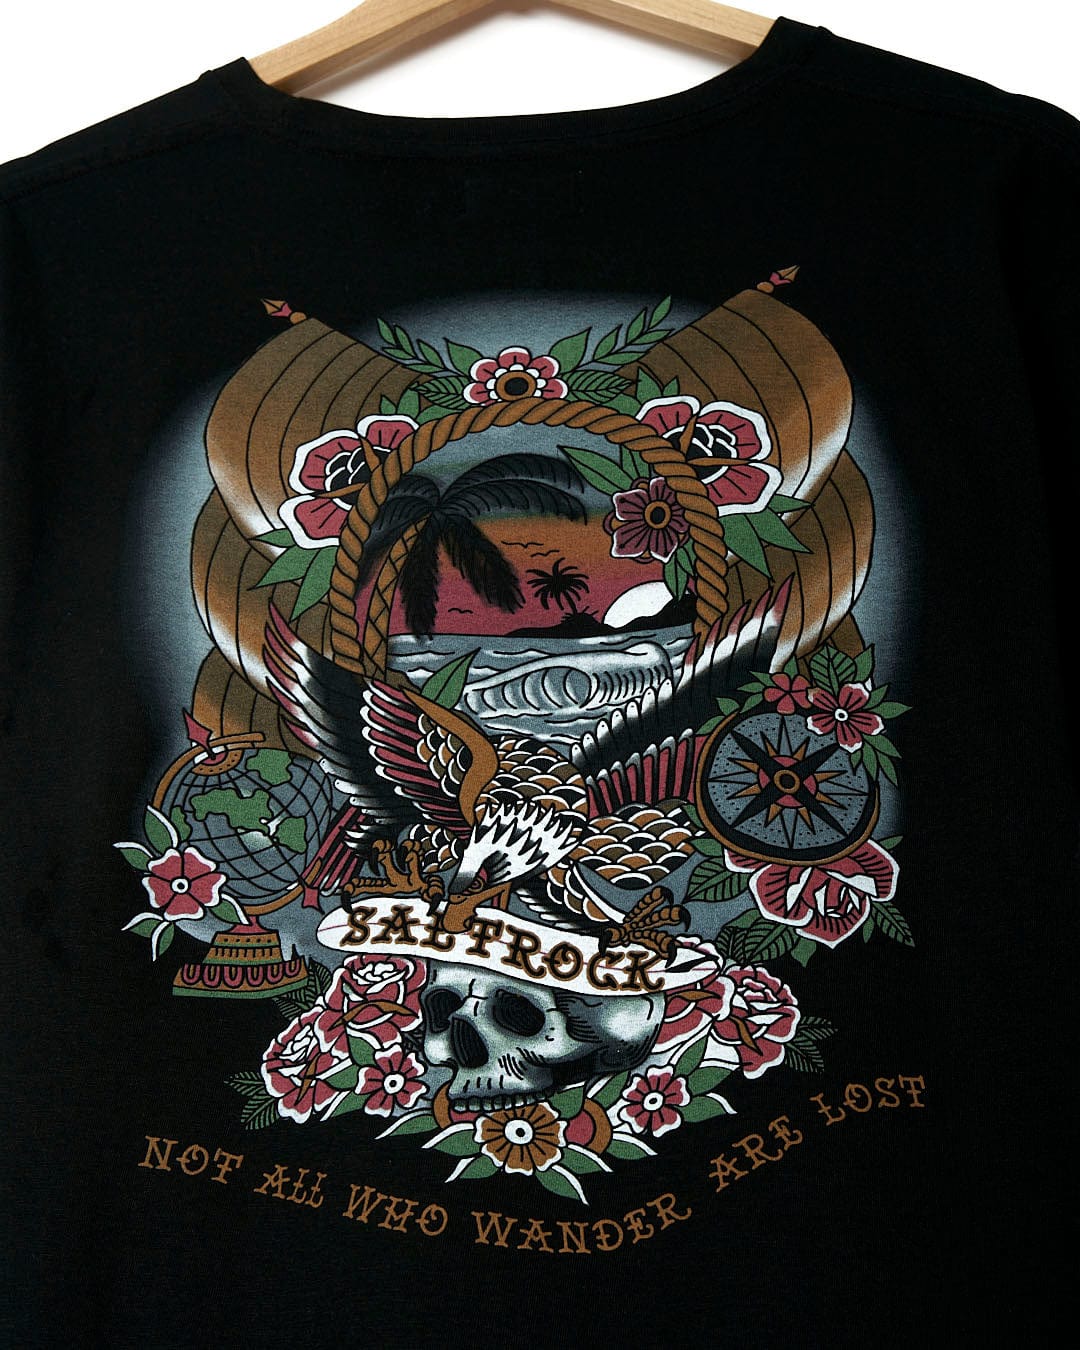 A Saltrock Tattoo Island 2 - Mens Short Sleeve T-Shirt - Black with an image of a skull and an eagle.